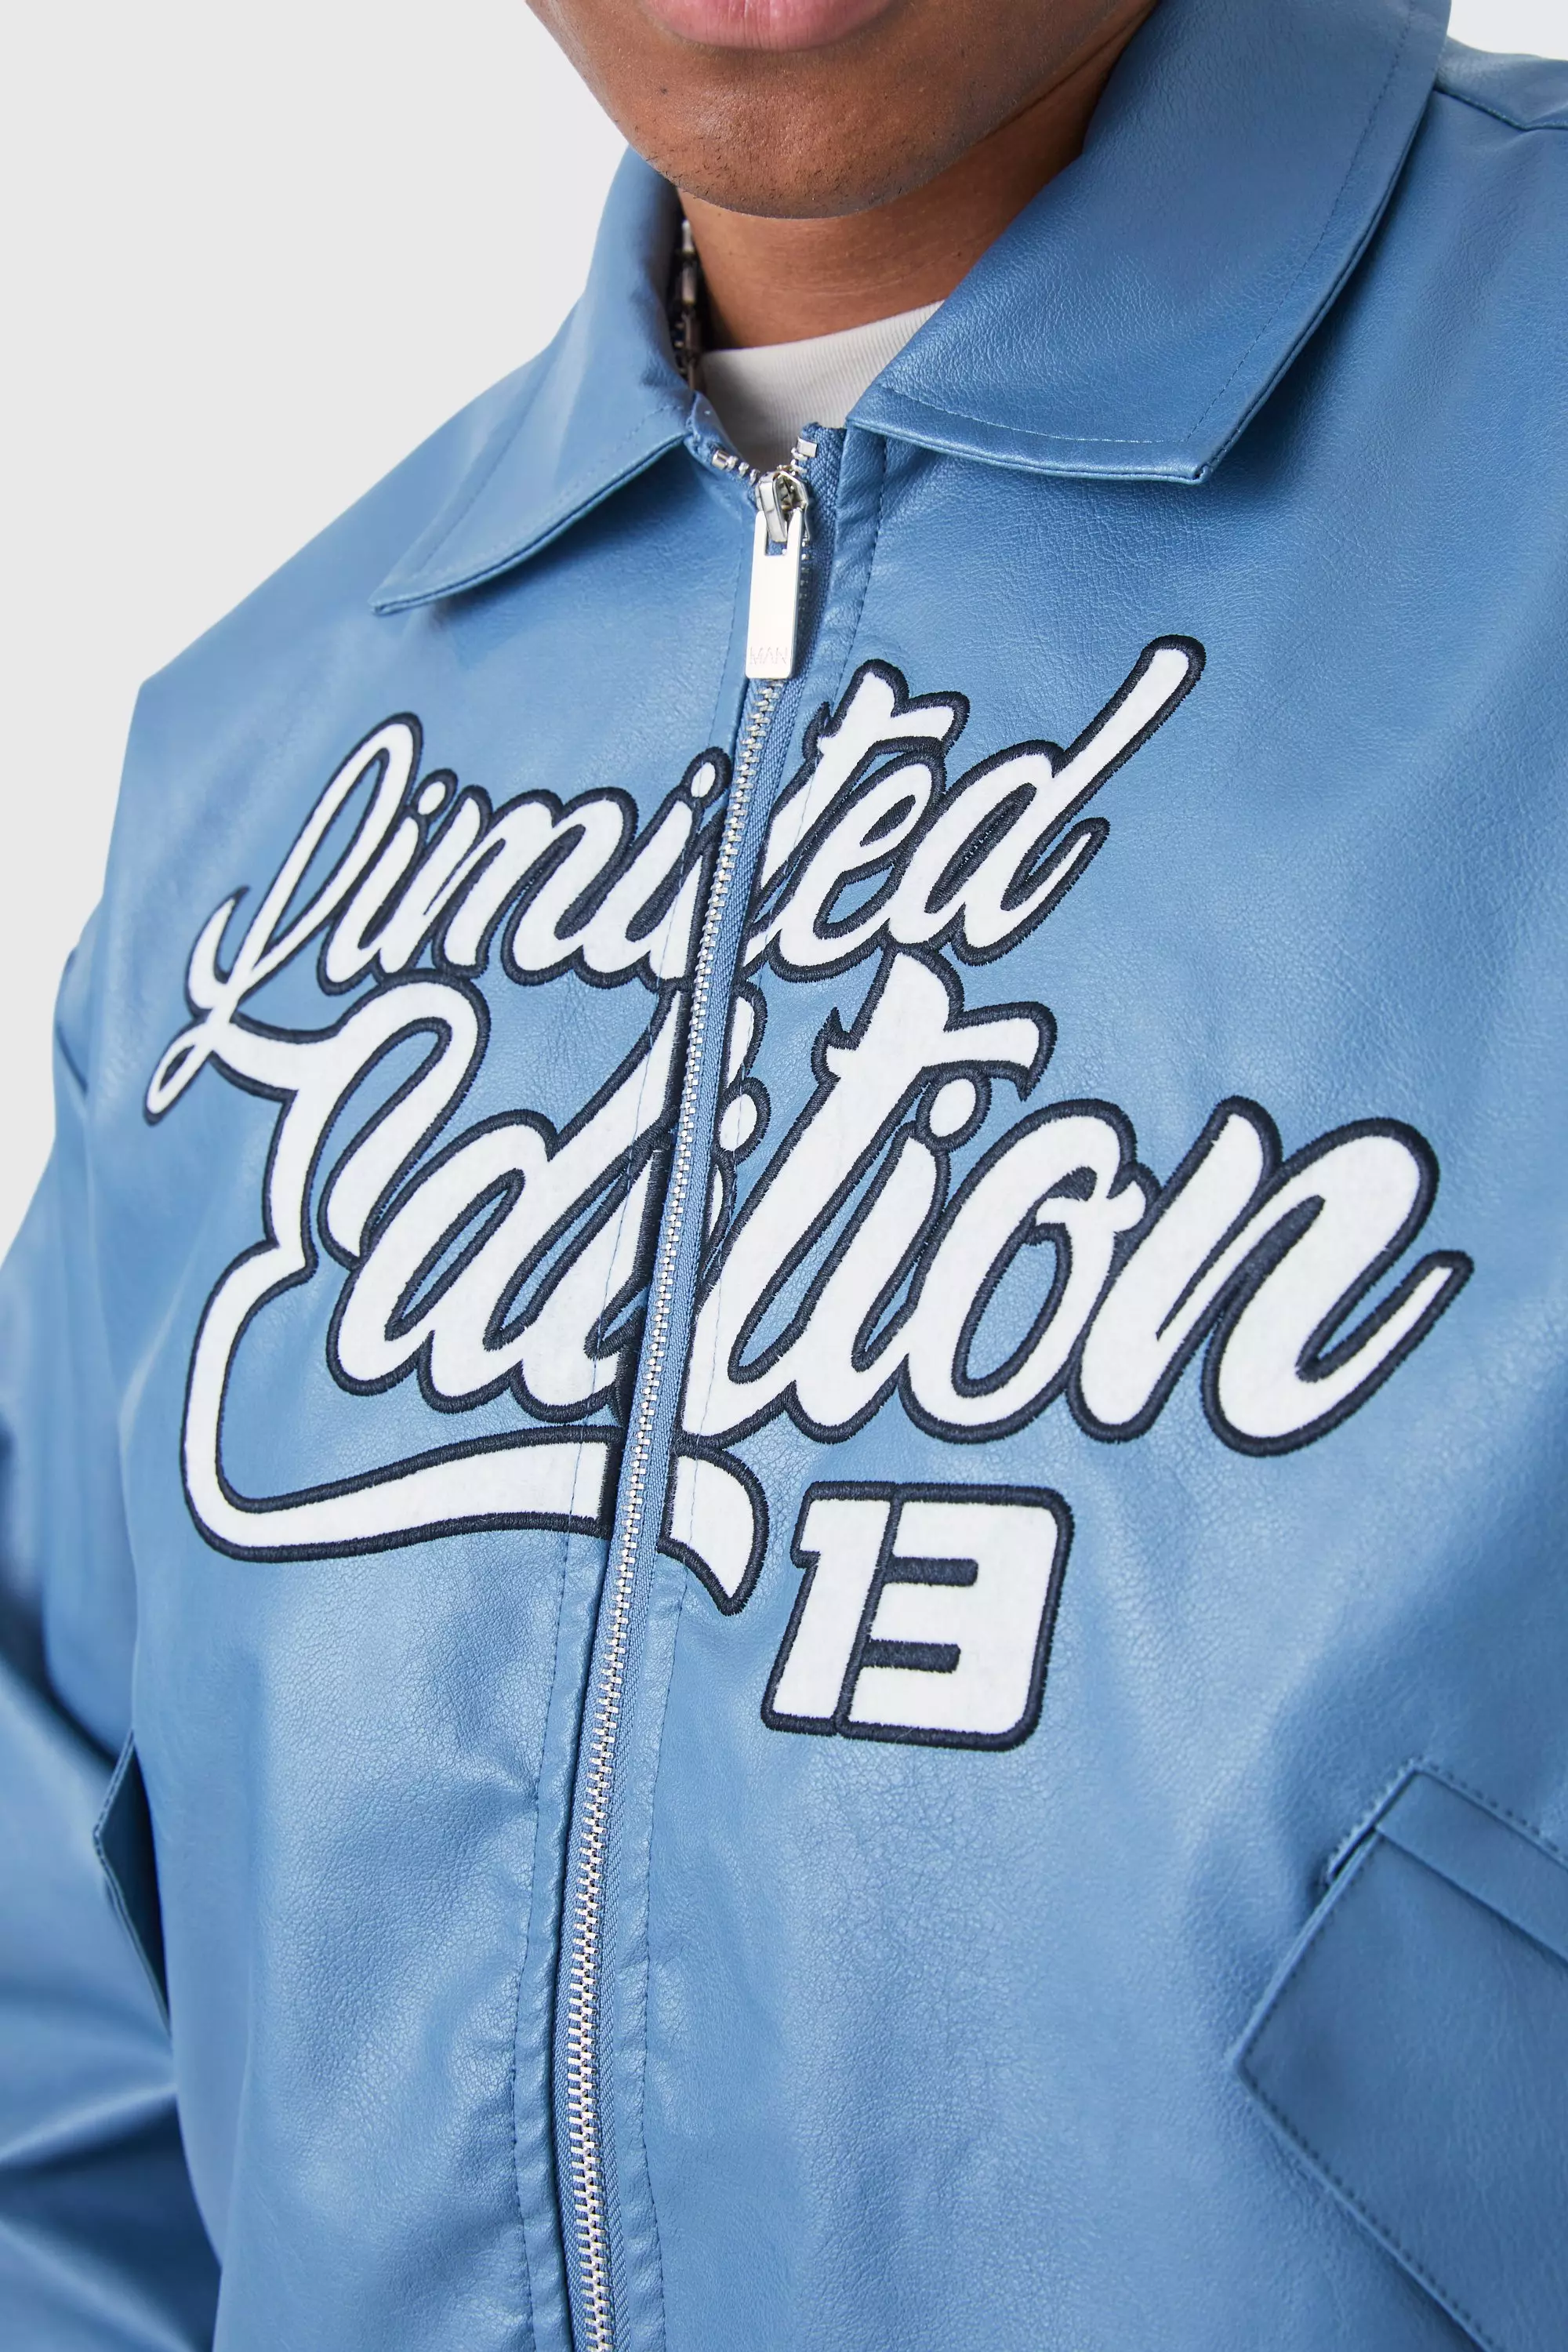 Limited Edition Boxy Pu Collared Bomber Blue